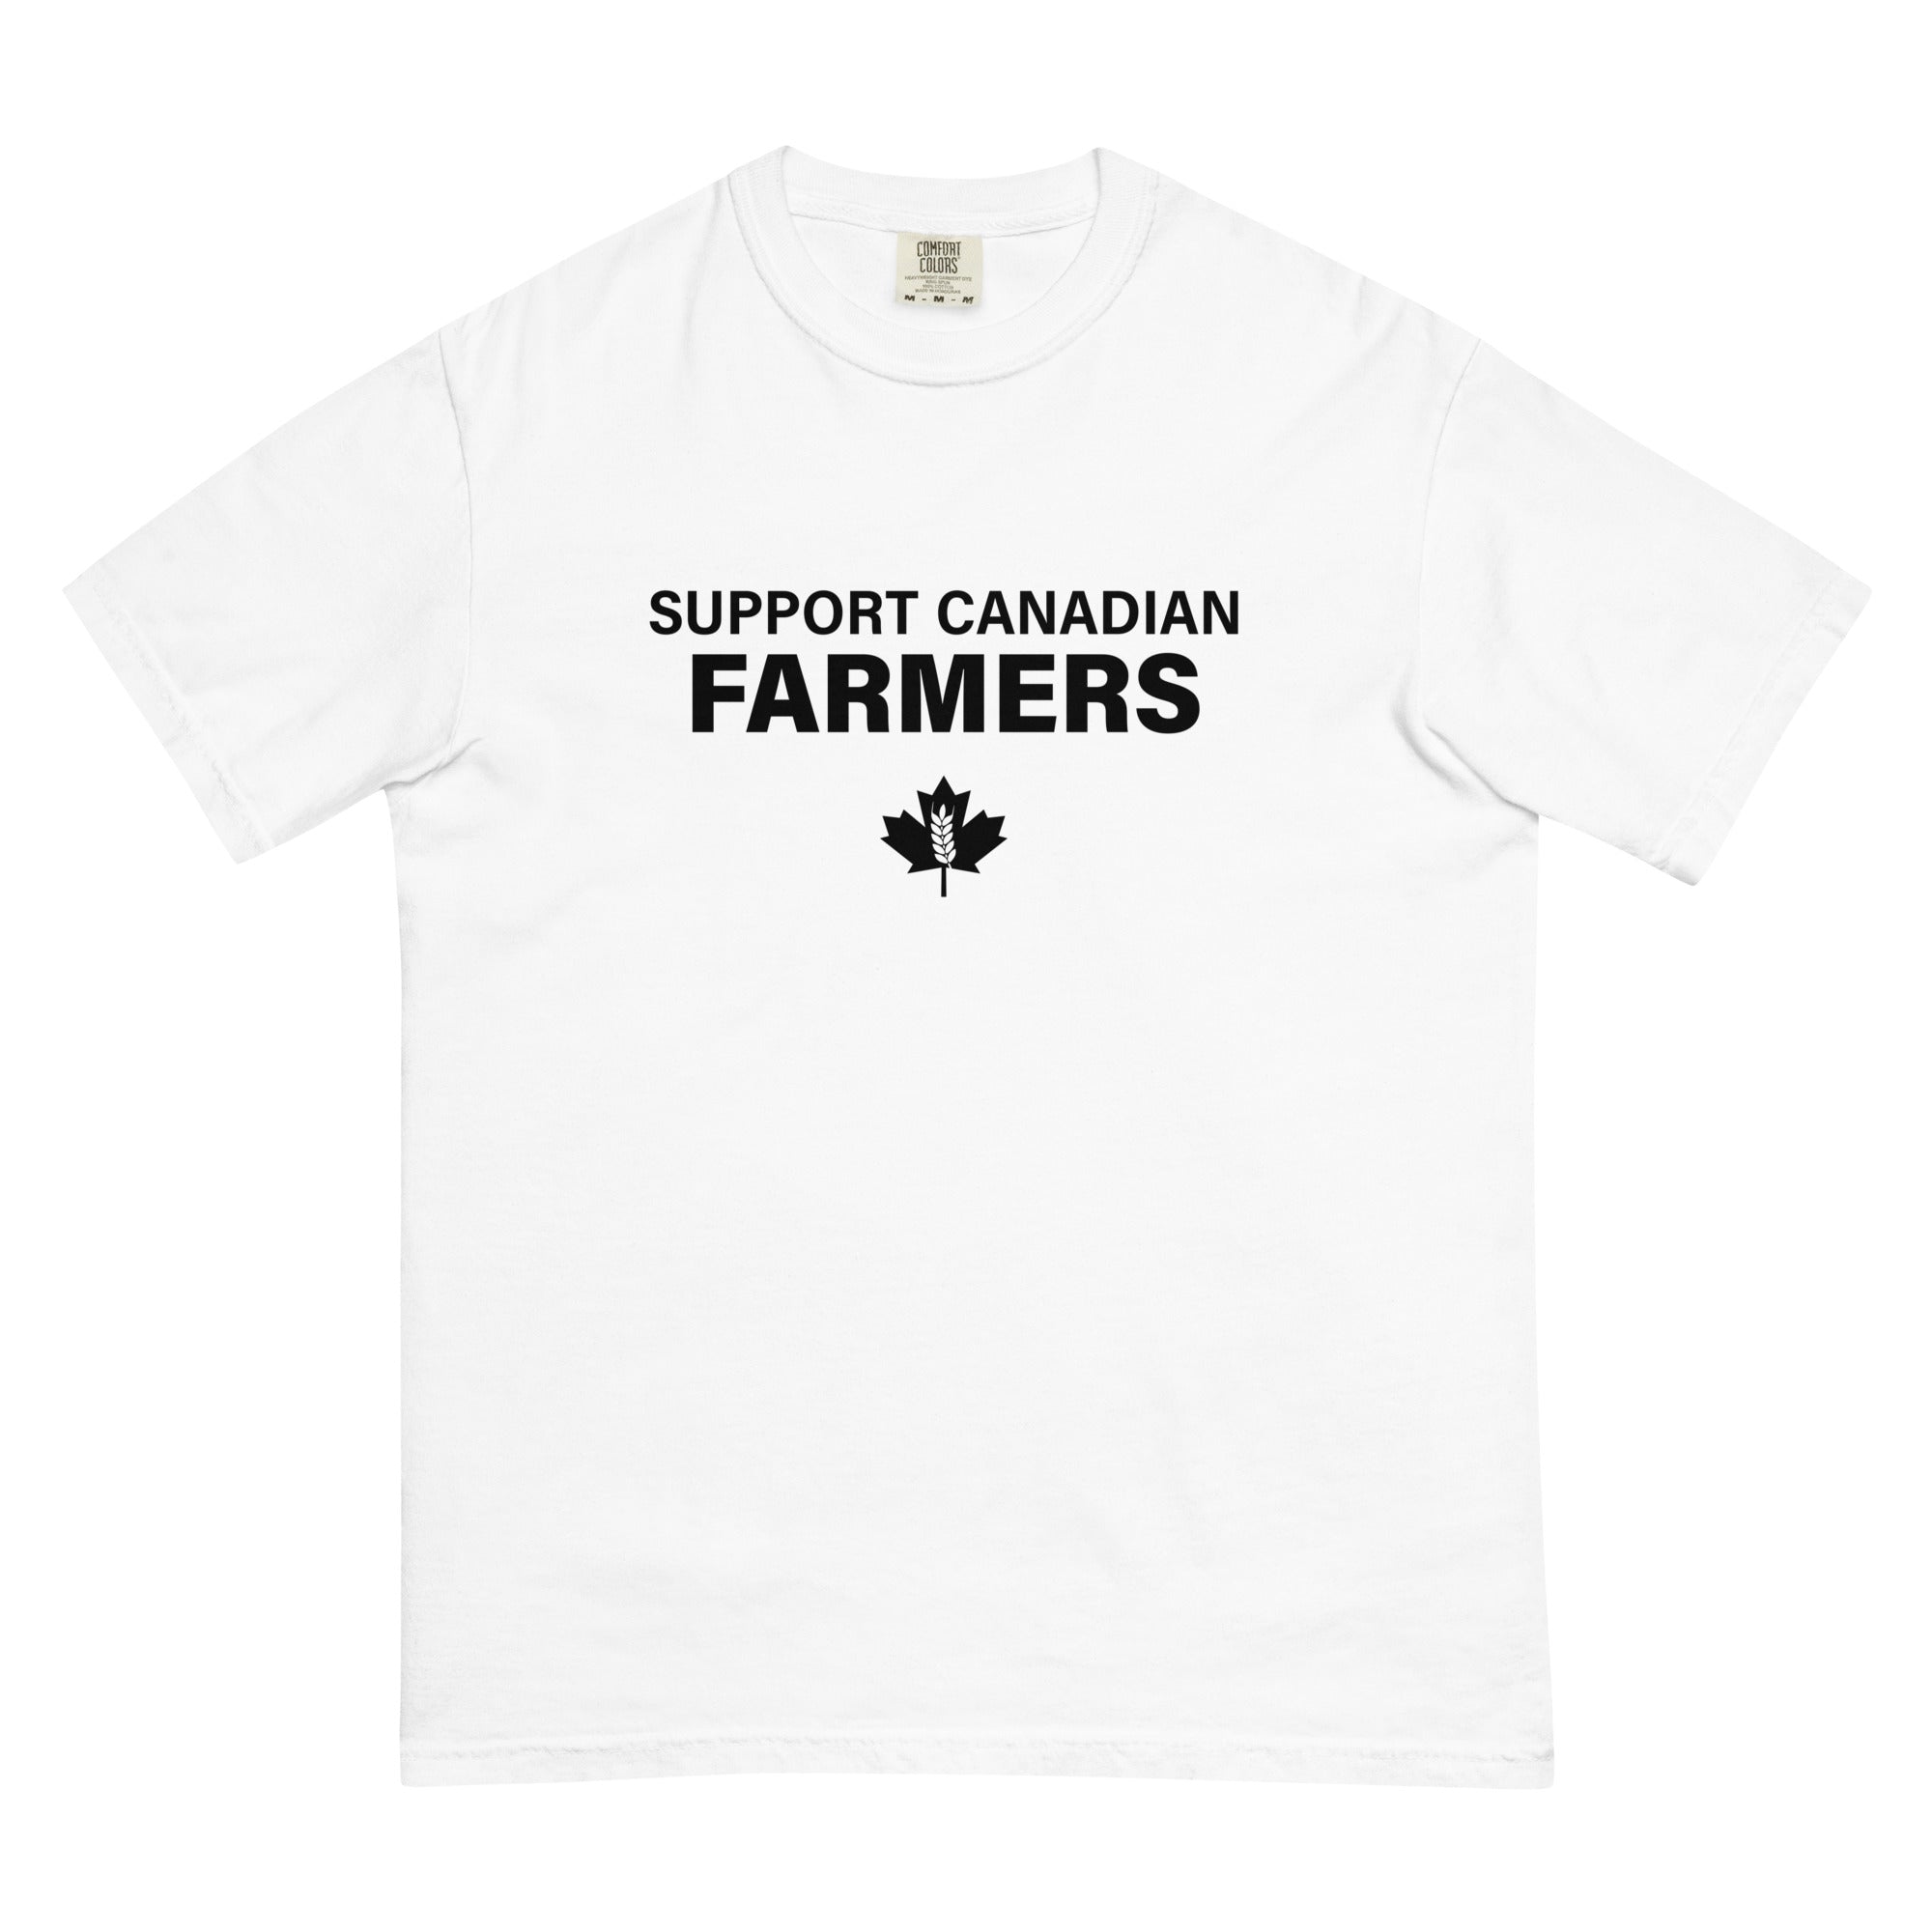 Men's "Support Canadian Farmers" t-shirt